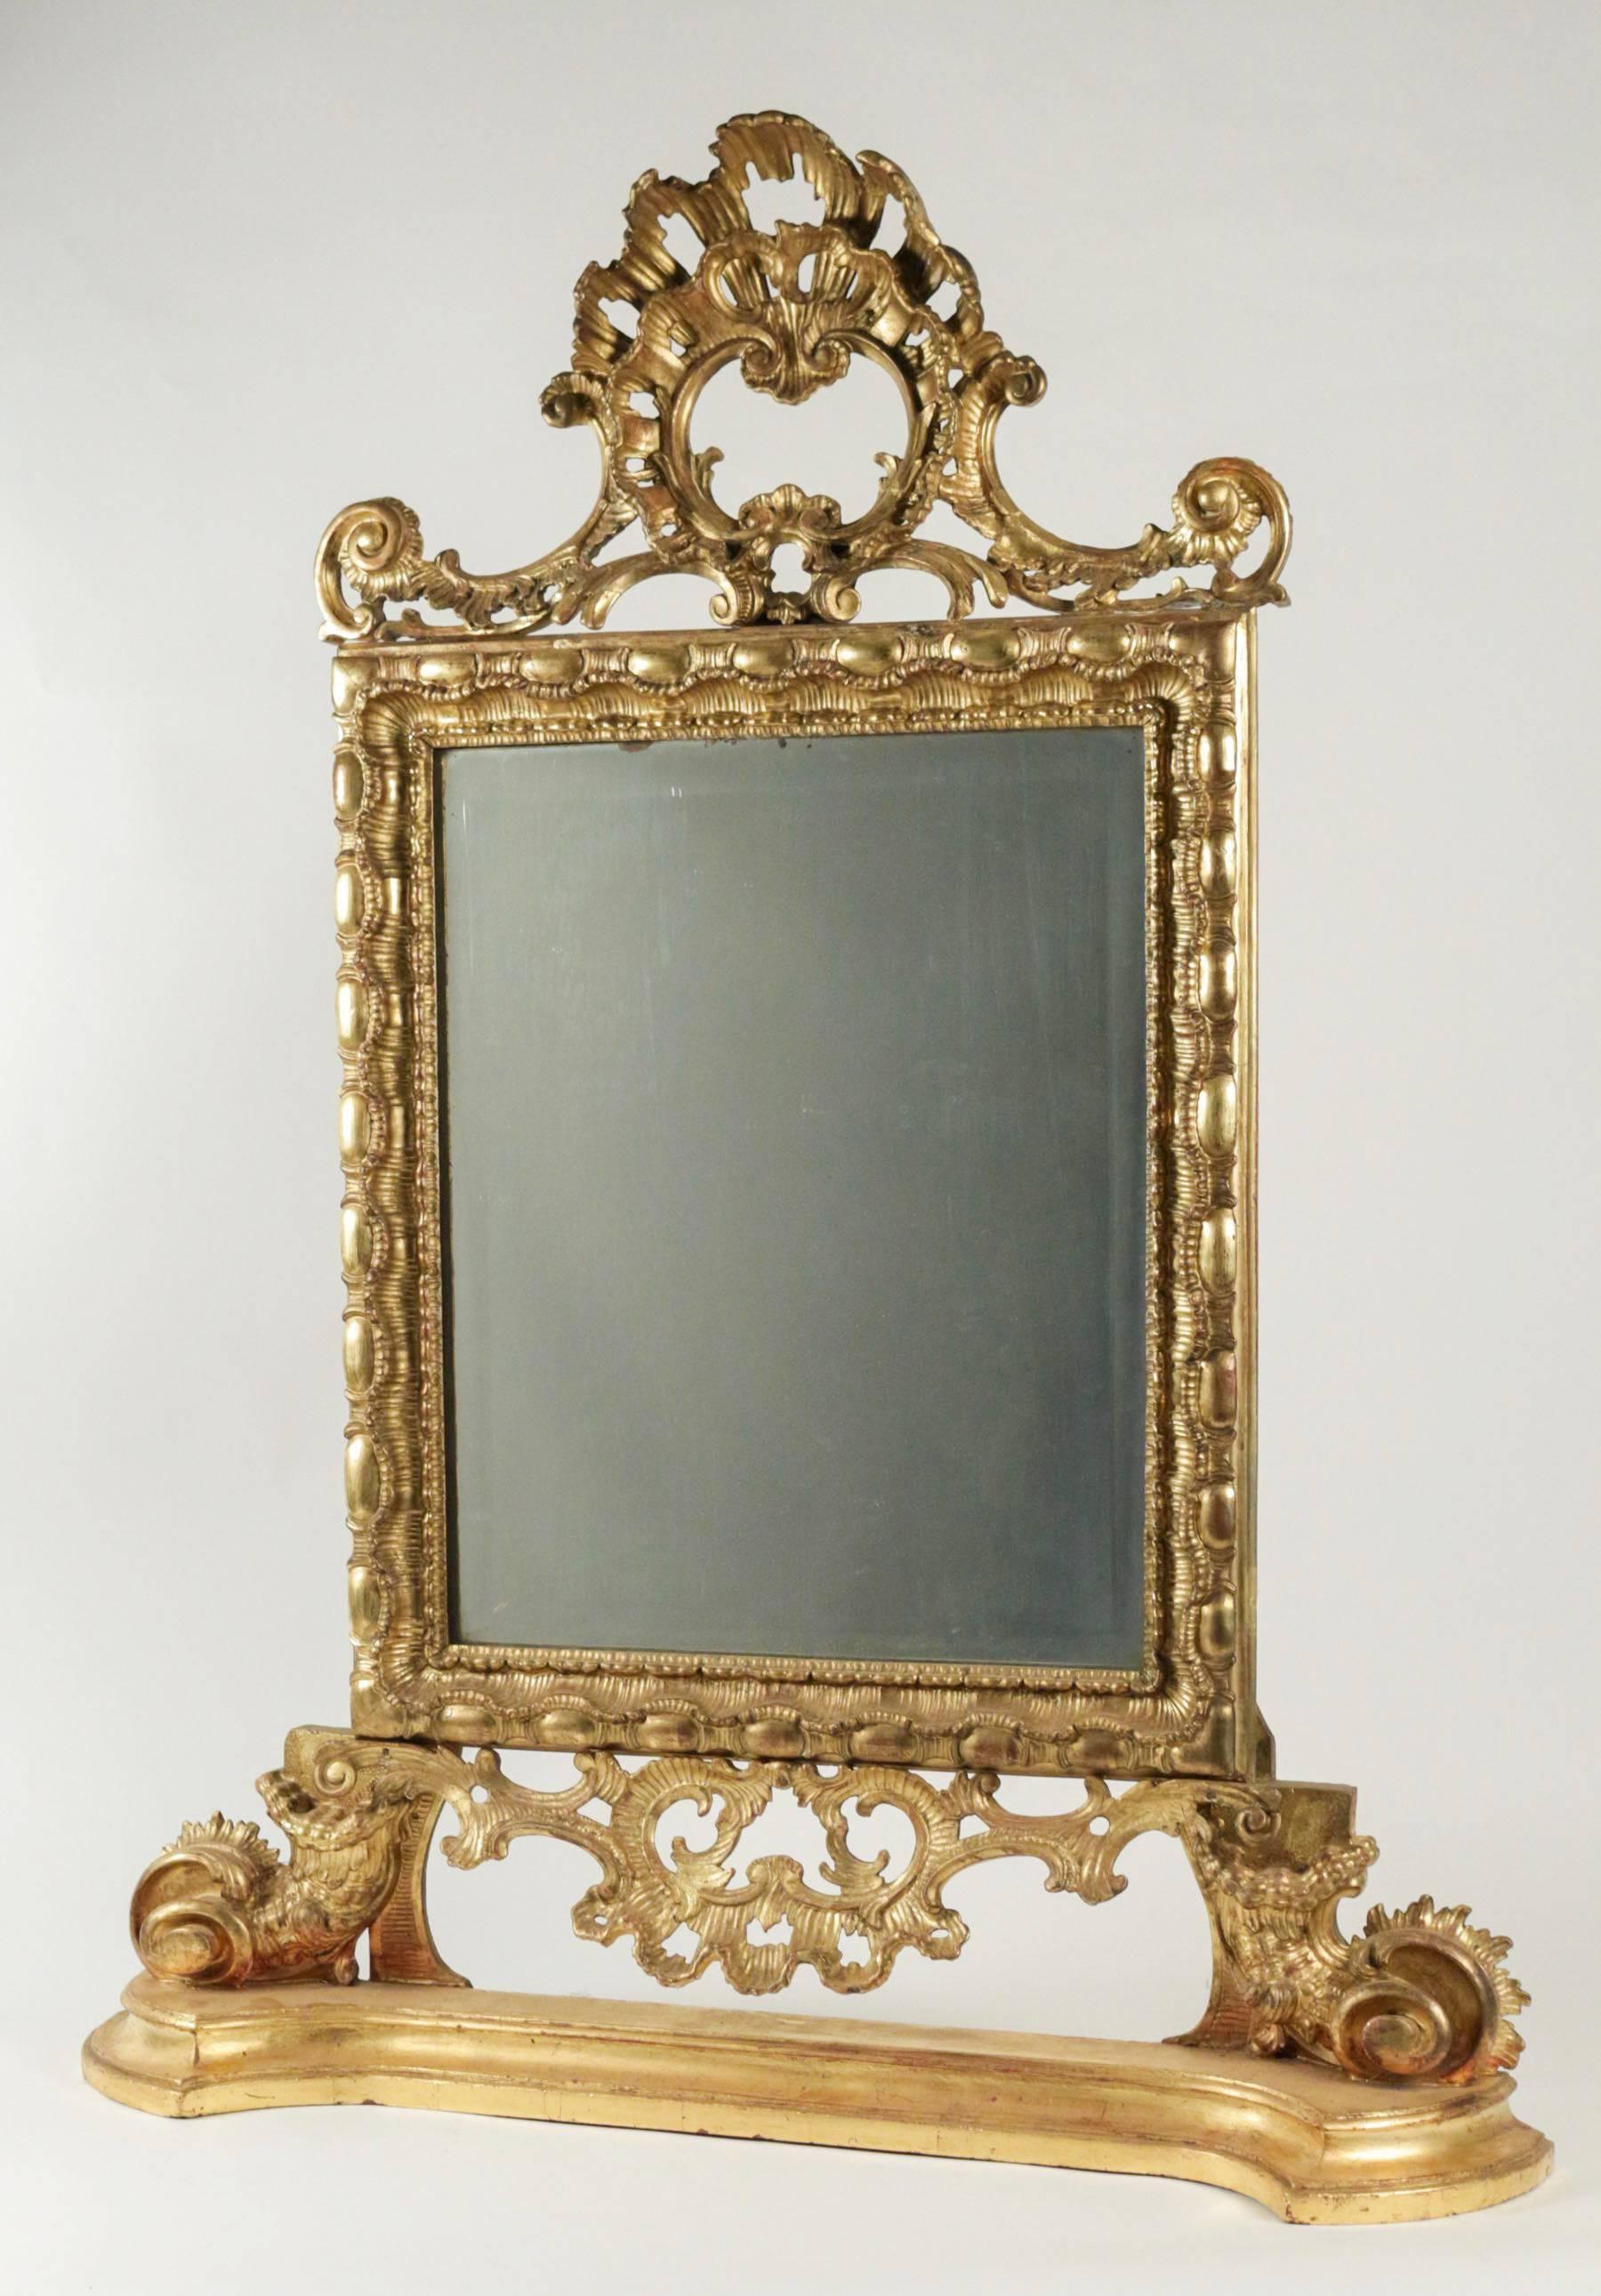 A gorgeous and rare Italian original giltwood front top mirror with beautiful hand-carved floral scrolls and horns of plenty.
Fine original giltwood. 

Italian, mid-18th century, certainly Piemontese work, circa 1740-1750.

Our mirror is in